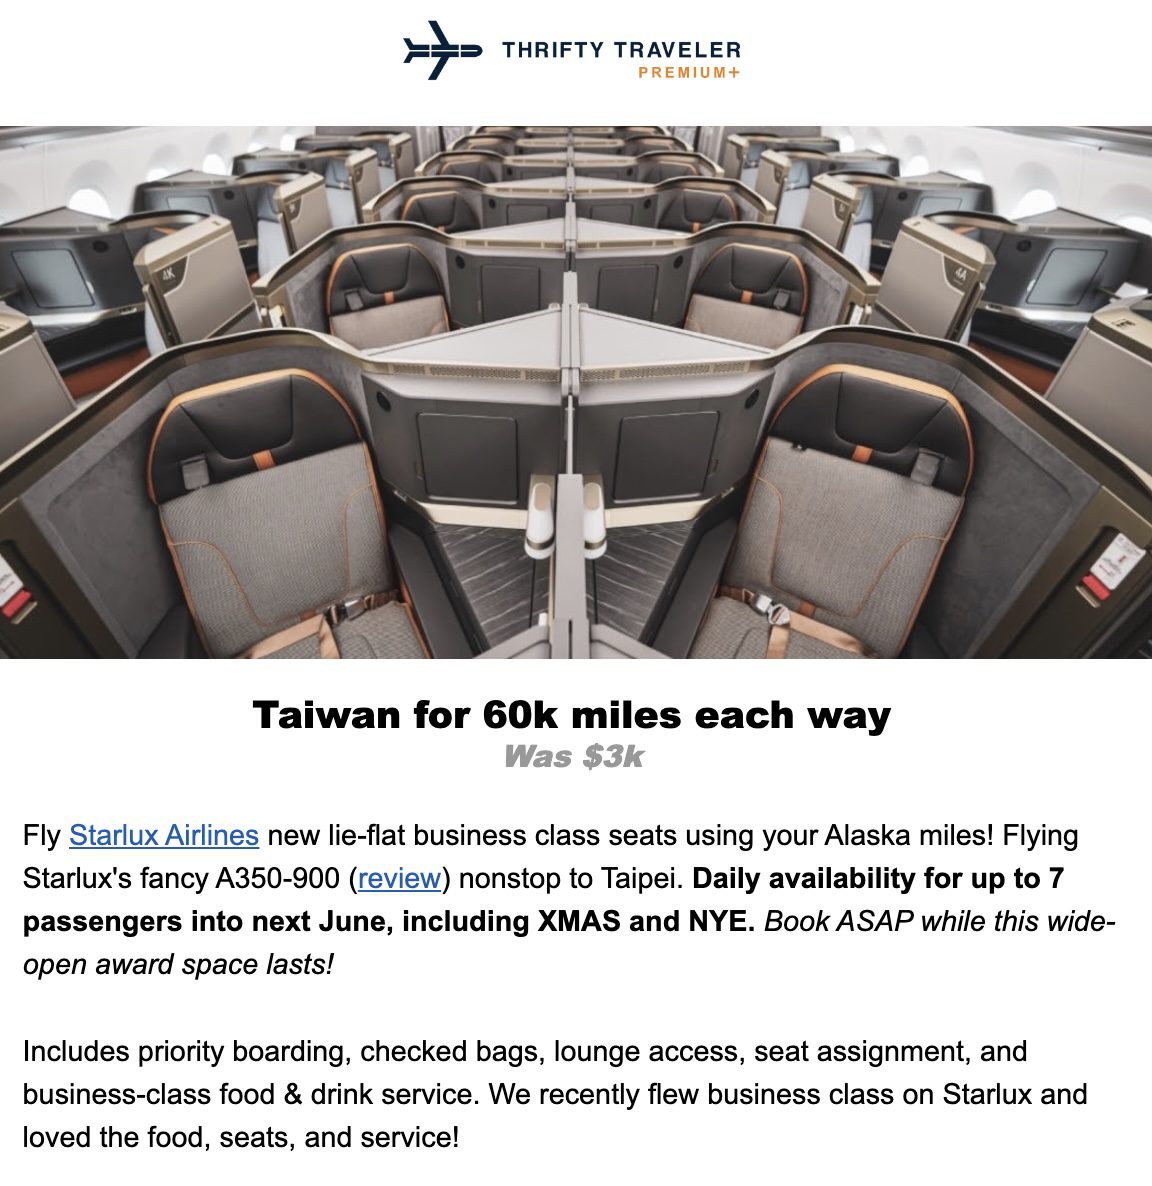 Los Angeles to Taiwan flight deal